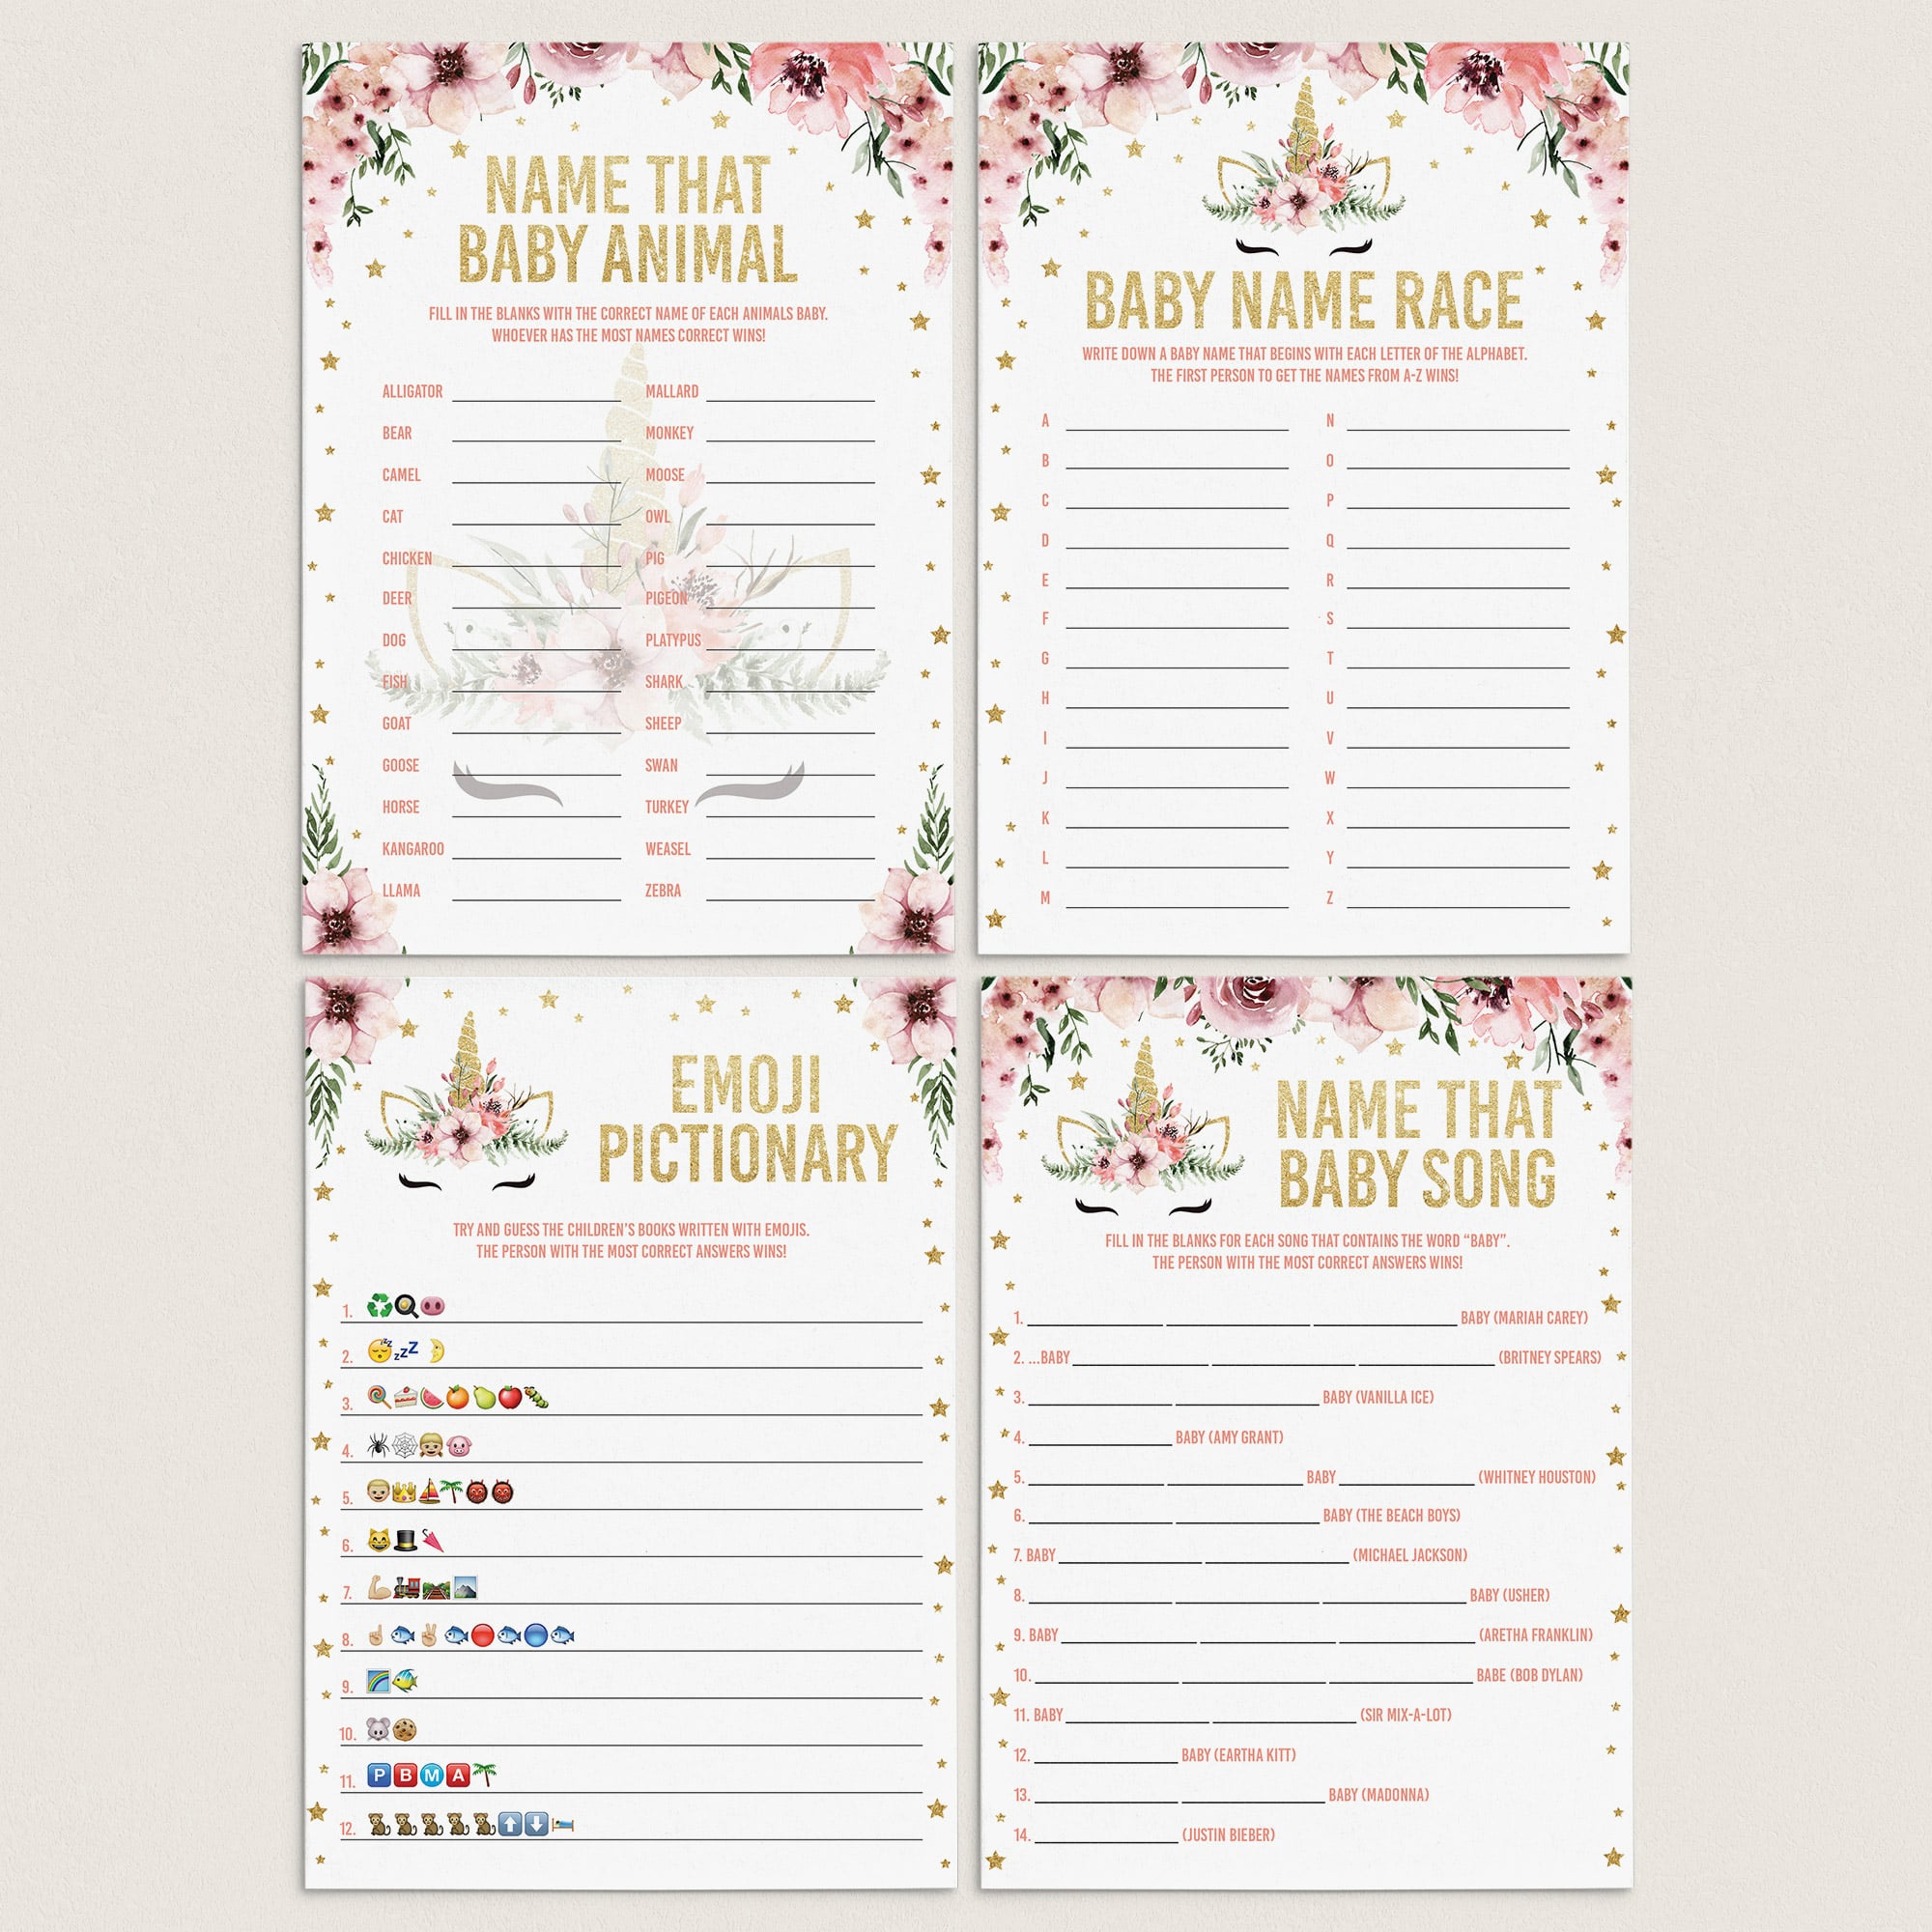 Pink and gold baby shower games printables by LittleSizzle